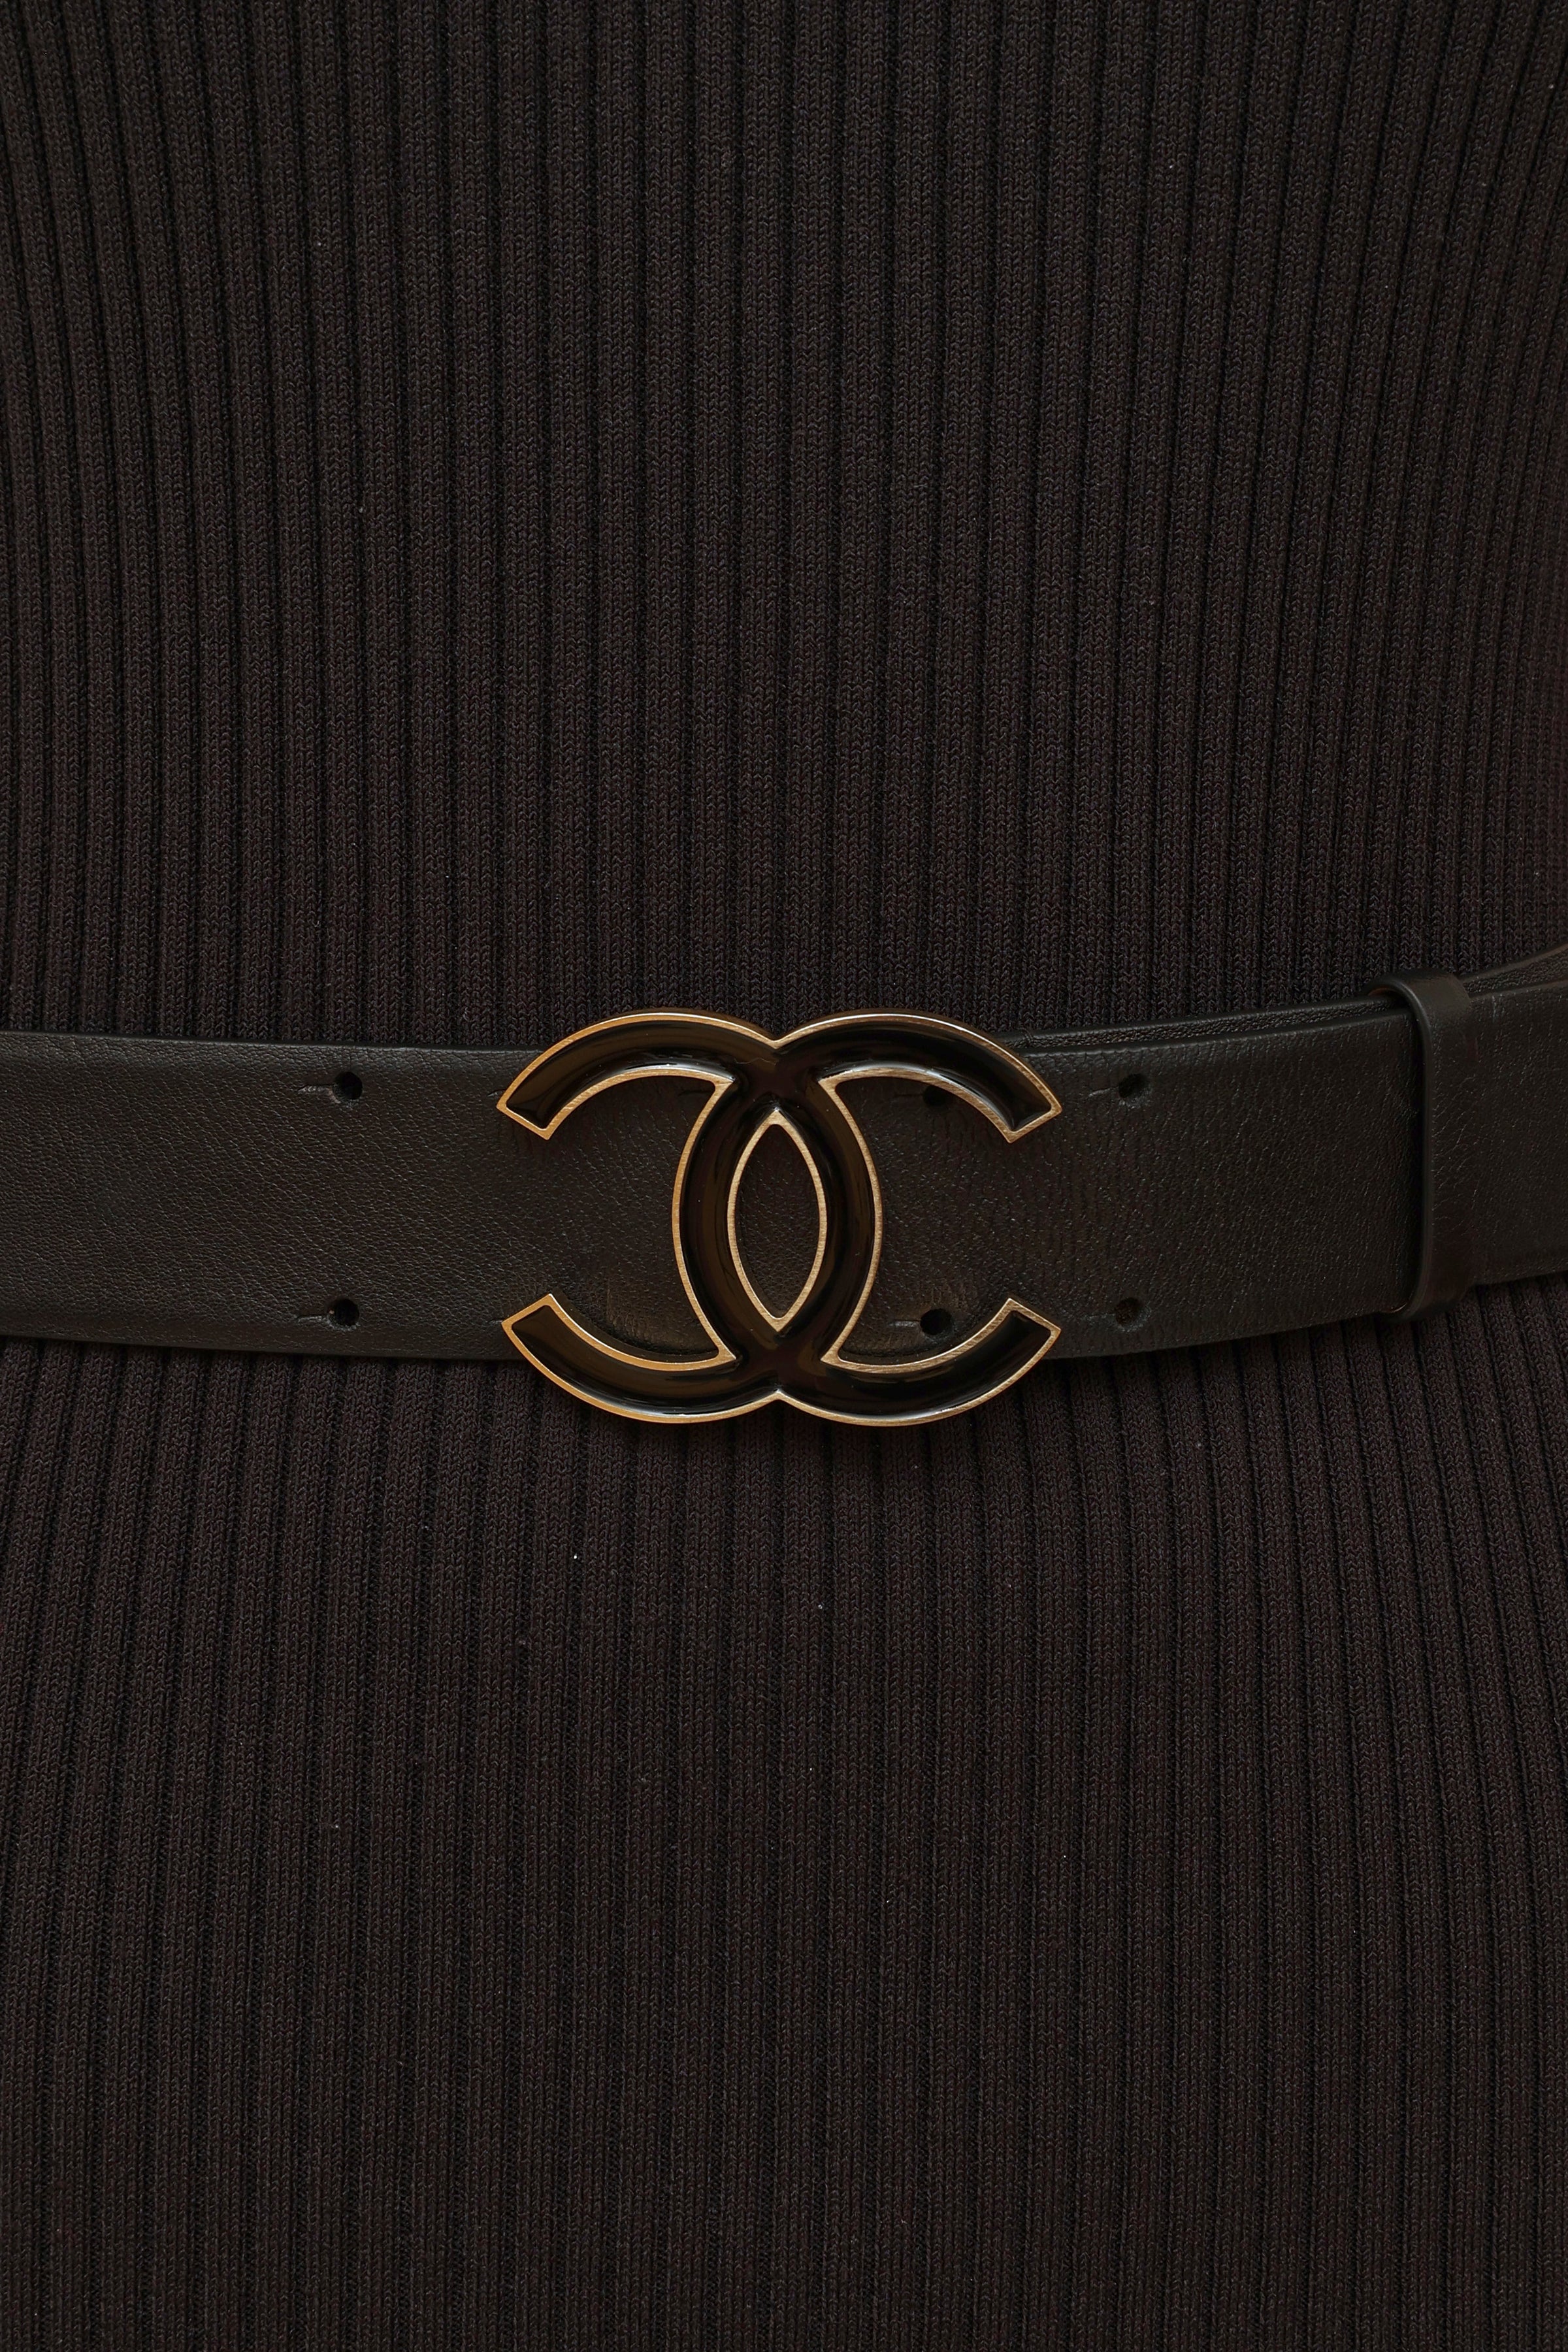 CHANEL Women's Leather Belts for sale